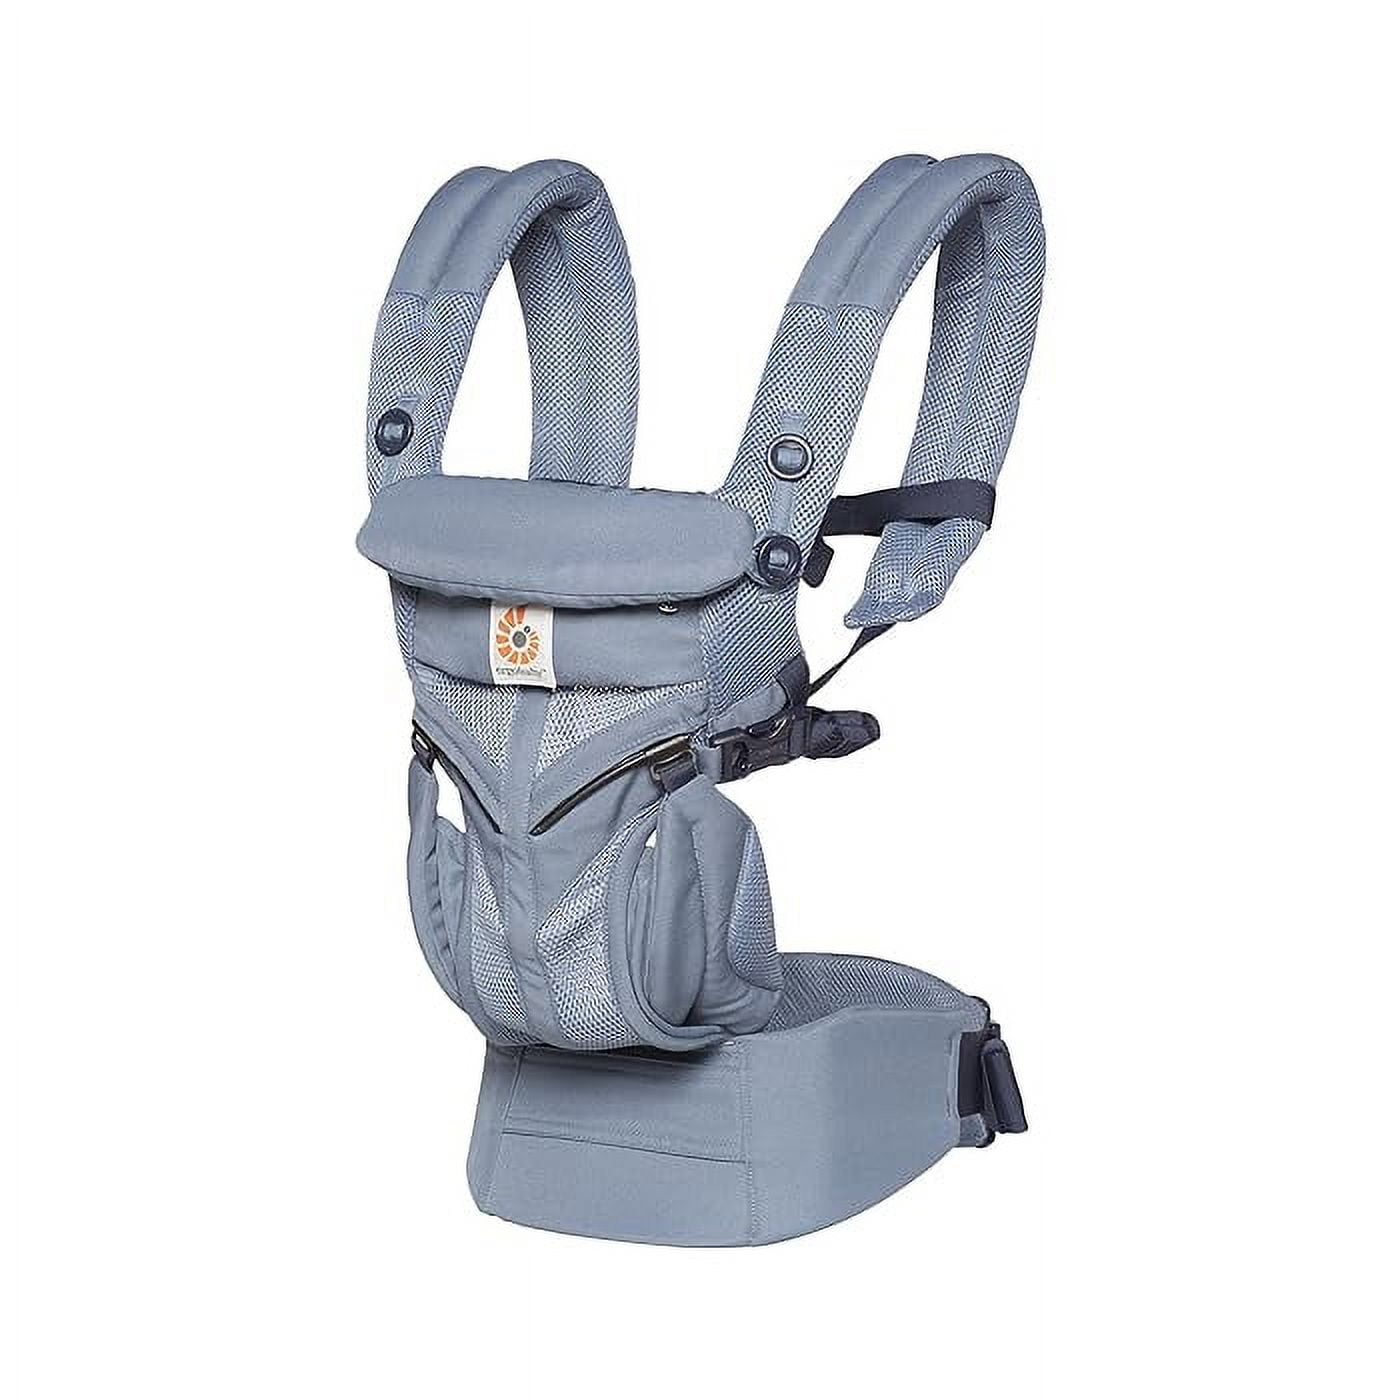 Ergobaby Omni 360 All-Position Baby Carrier for Newborn to Toddler with  Lumbar Support & Cool Air Mesh (7-45 Lb), Onyx Black 6.18x9.13x10.43 Inch